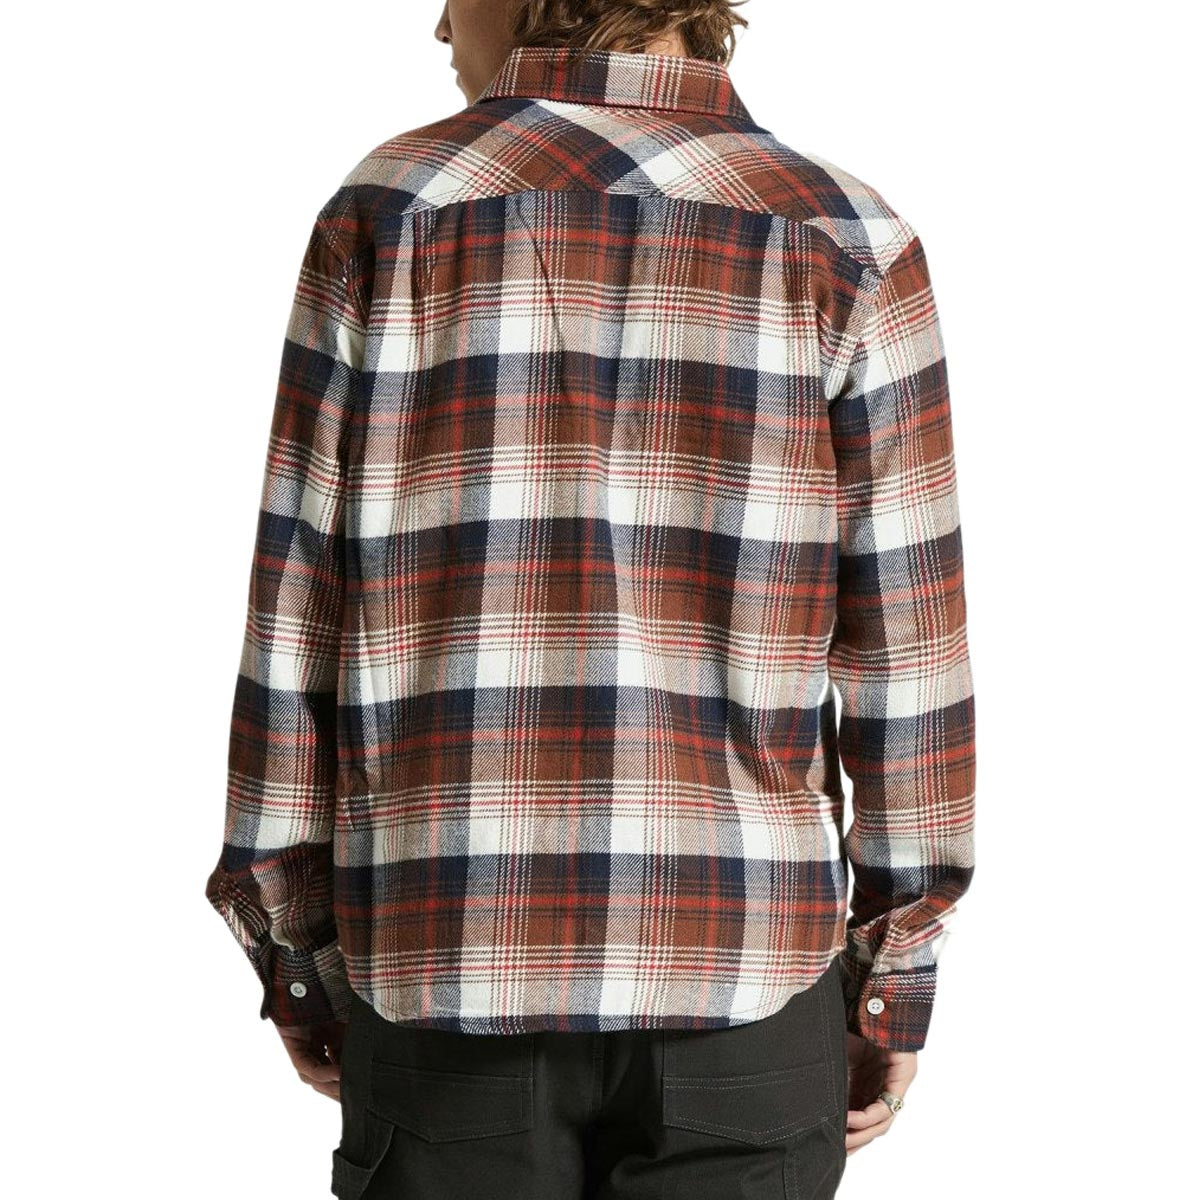 Brixton Bowery Flannel Long Sleeve Shirt - Washed Navy/Sepia/Off White image 2